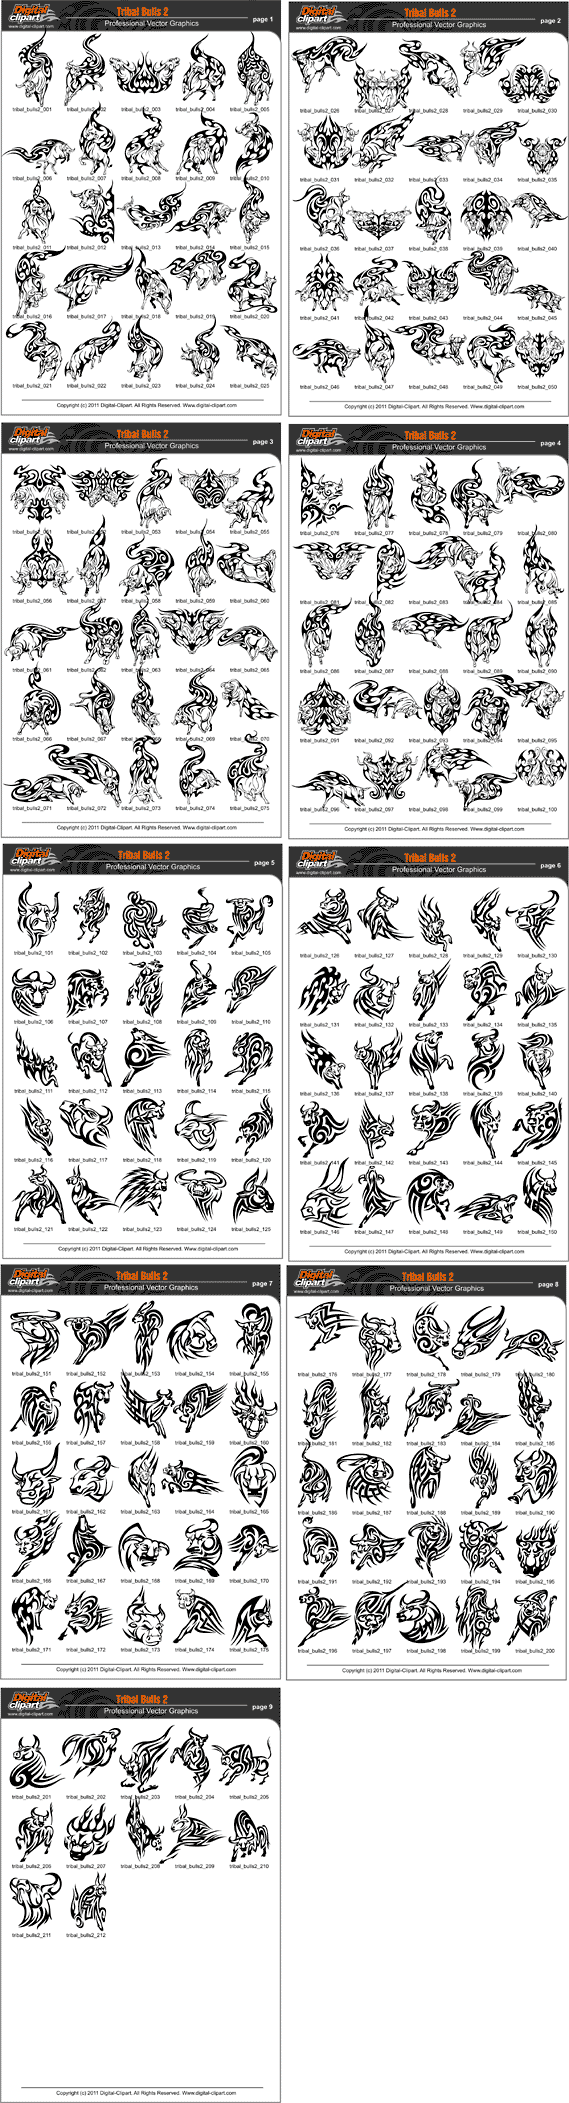 Tribal Bulls 2 - PDF - catalog. Cuttable vector clipart in EPS and AI formats. Vectorial Clip art for cutting plotters.